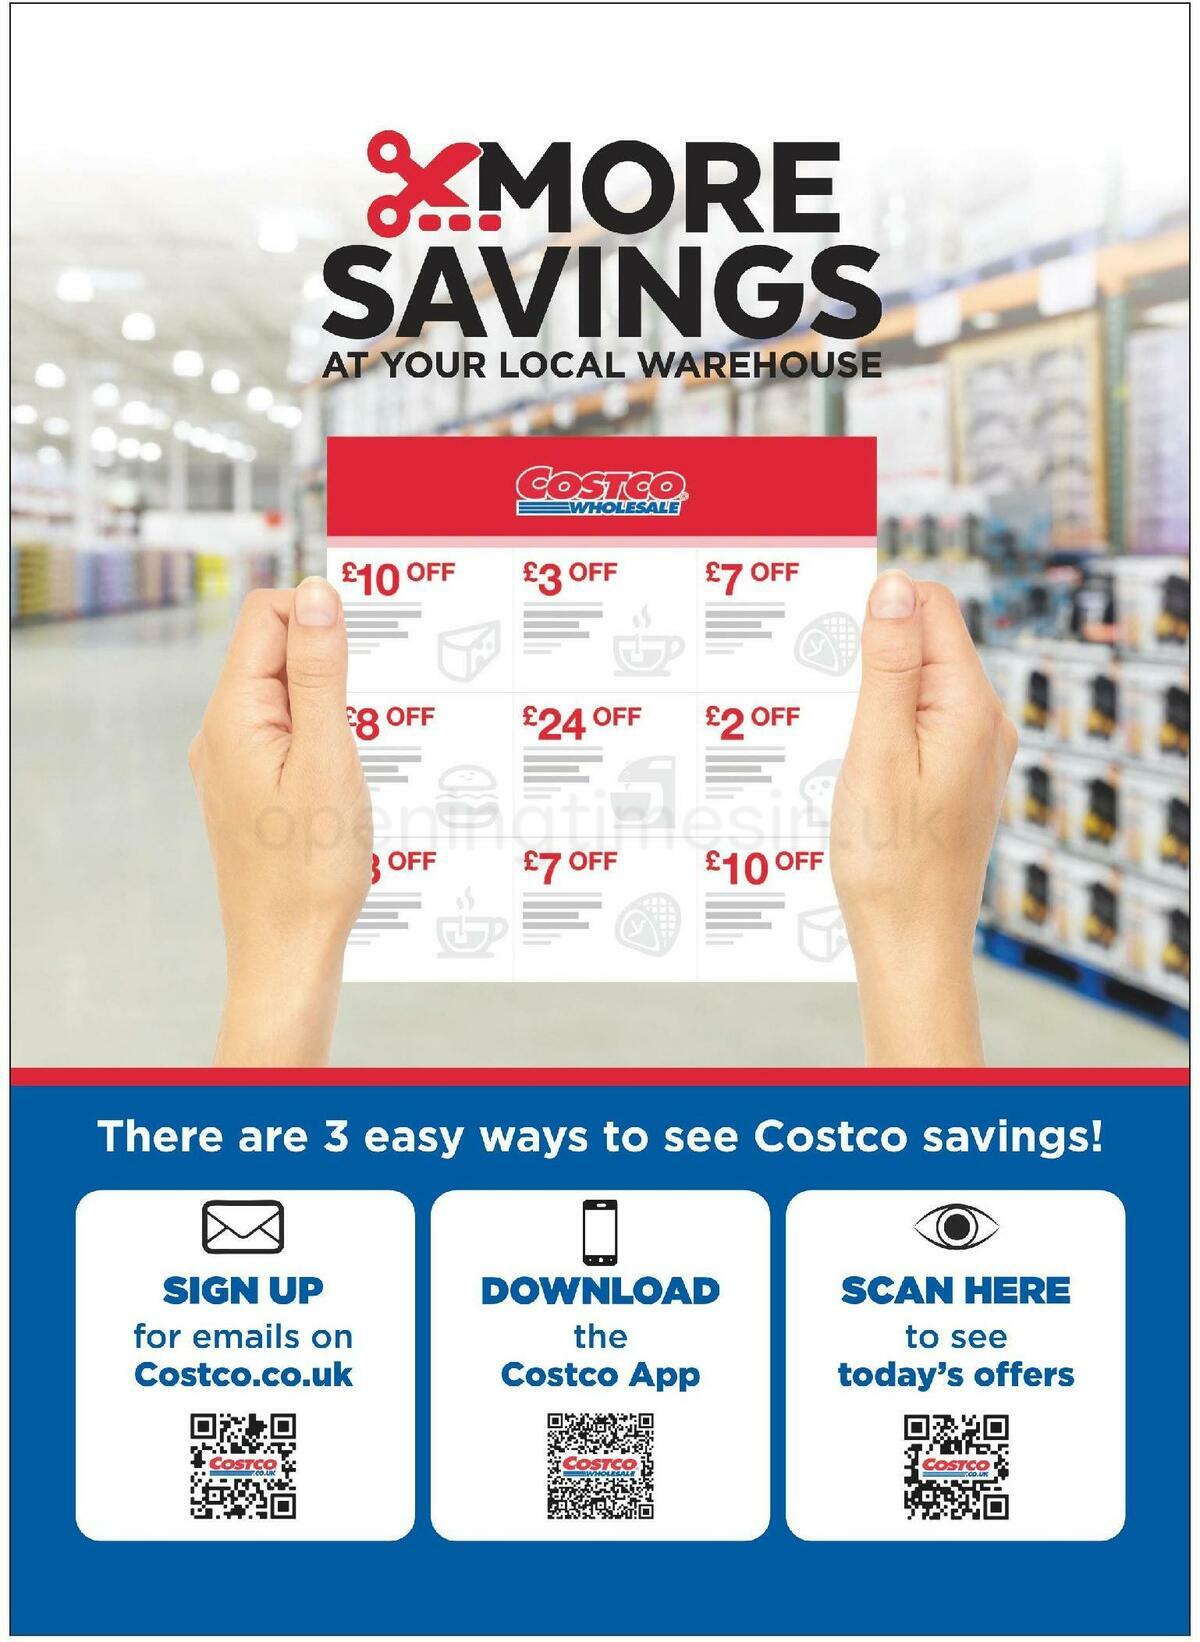 Costco Connection February/March Offers from 25 February